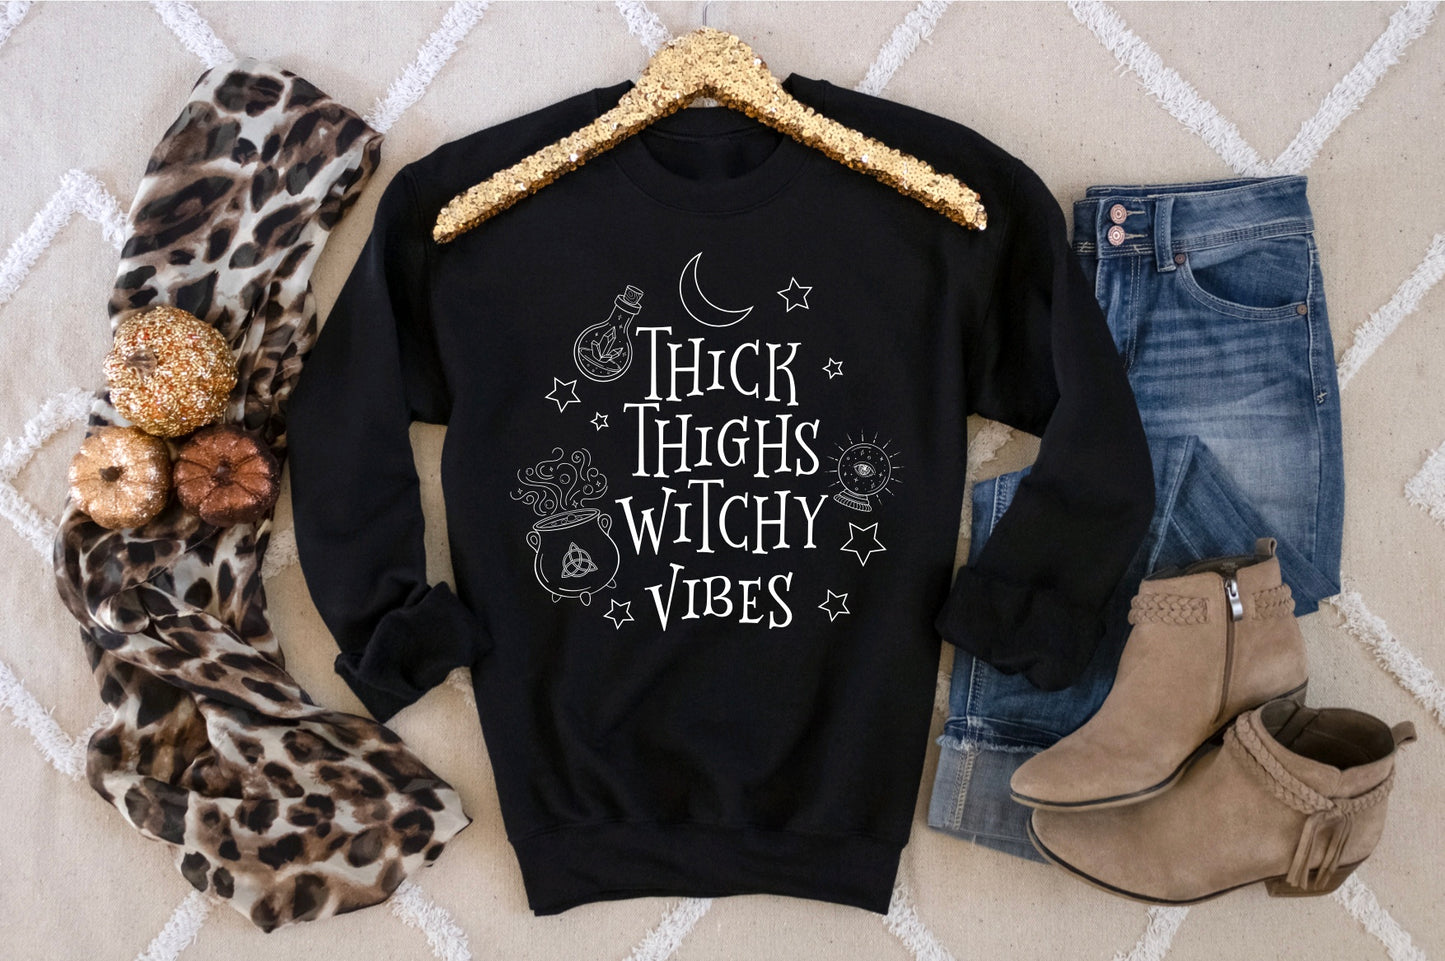  Women's Thick Thighs Witchy Vibes Black Crewneck Sweater